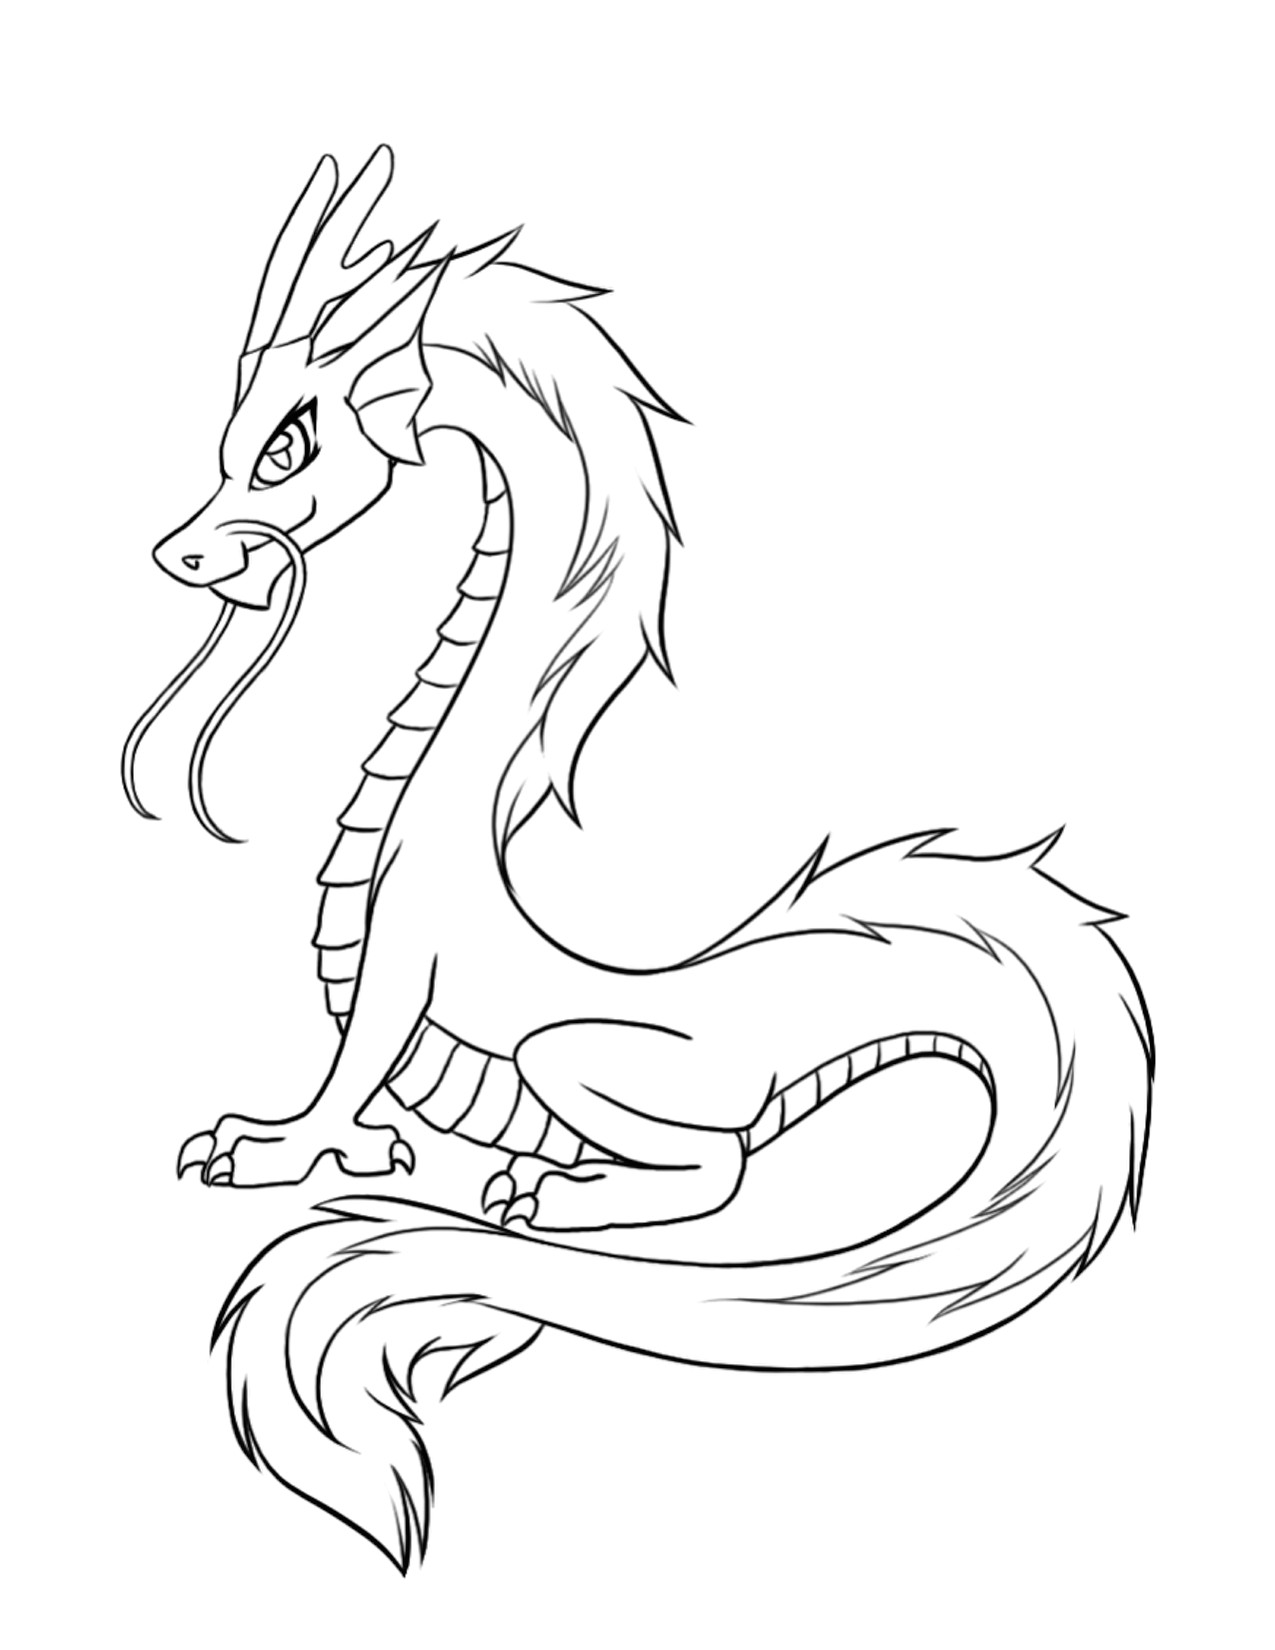 Dragon S Teeth Drawing Free Printable Dragon Coloring Pages for Kids Dragon Sketch